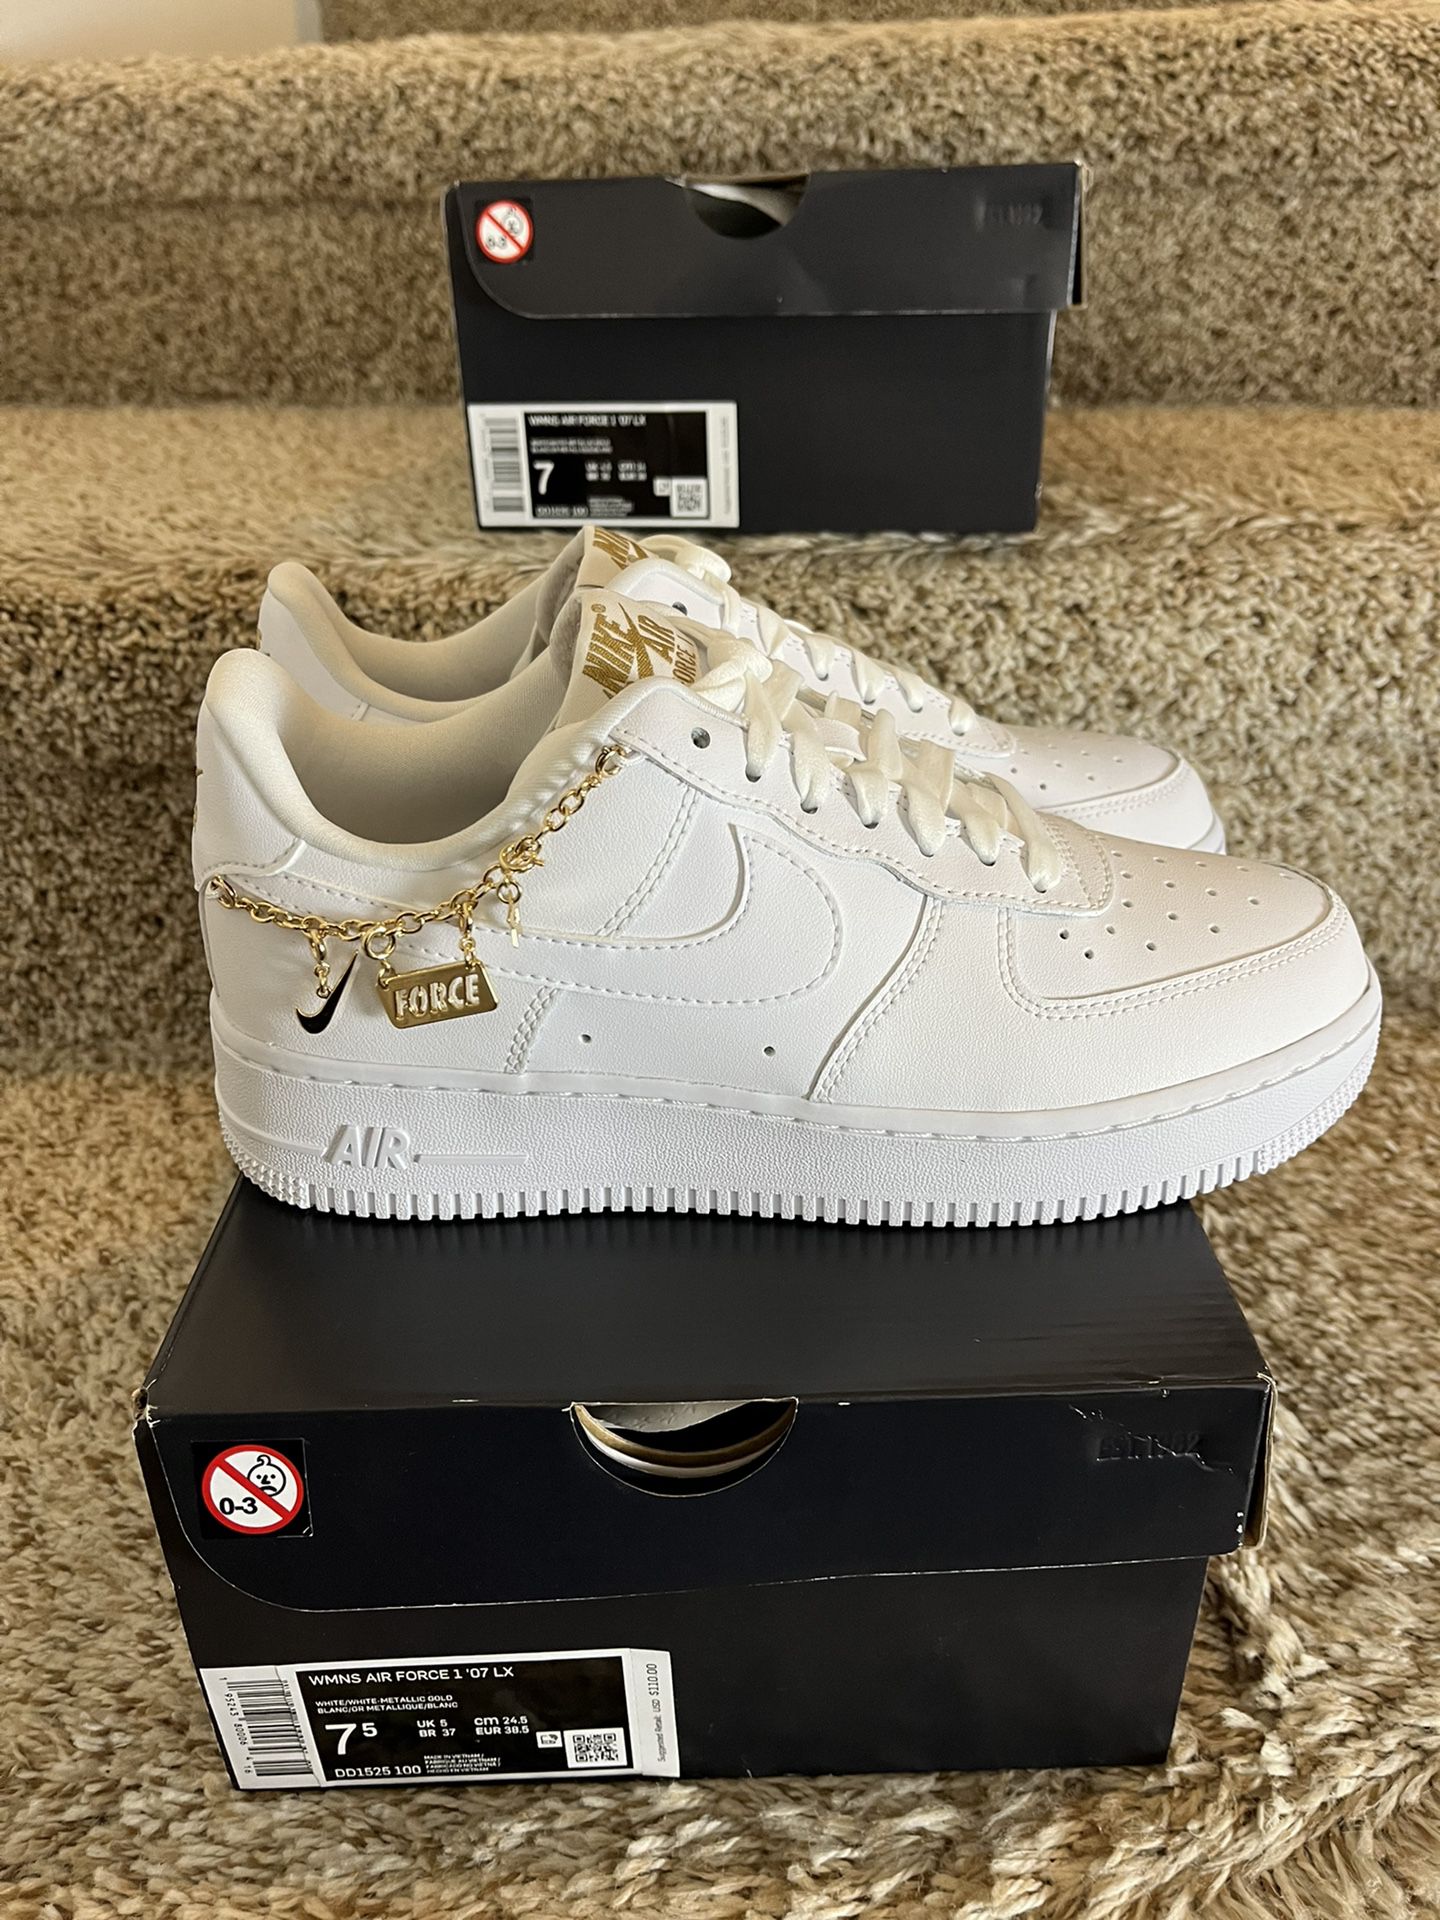 DS Nike Air Force 1 Low White Pendant Sz7.5W/6M for Sale in Katy, TX -  OfferUp